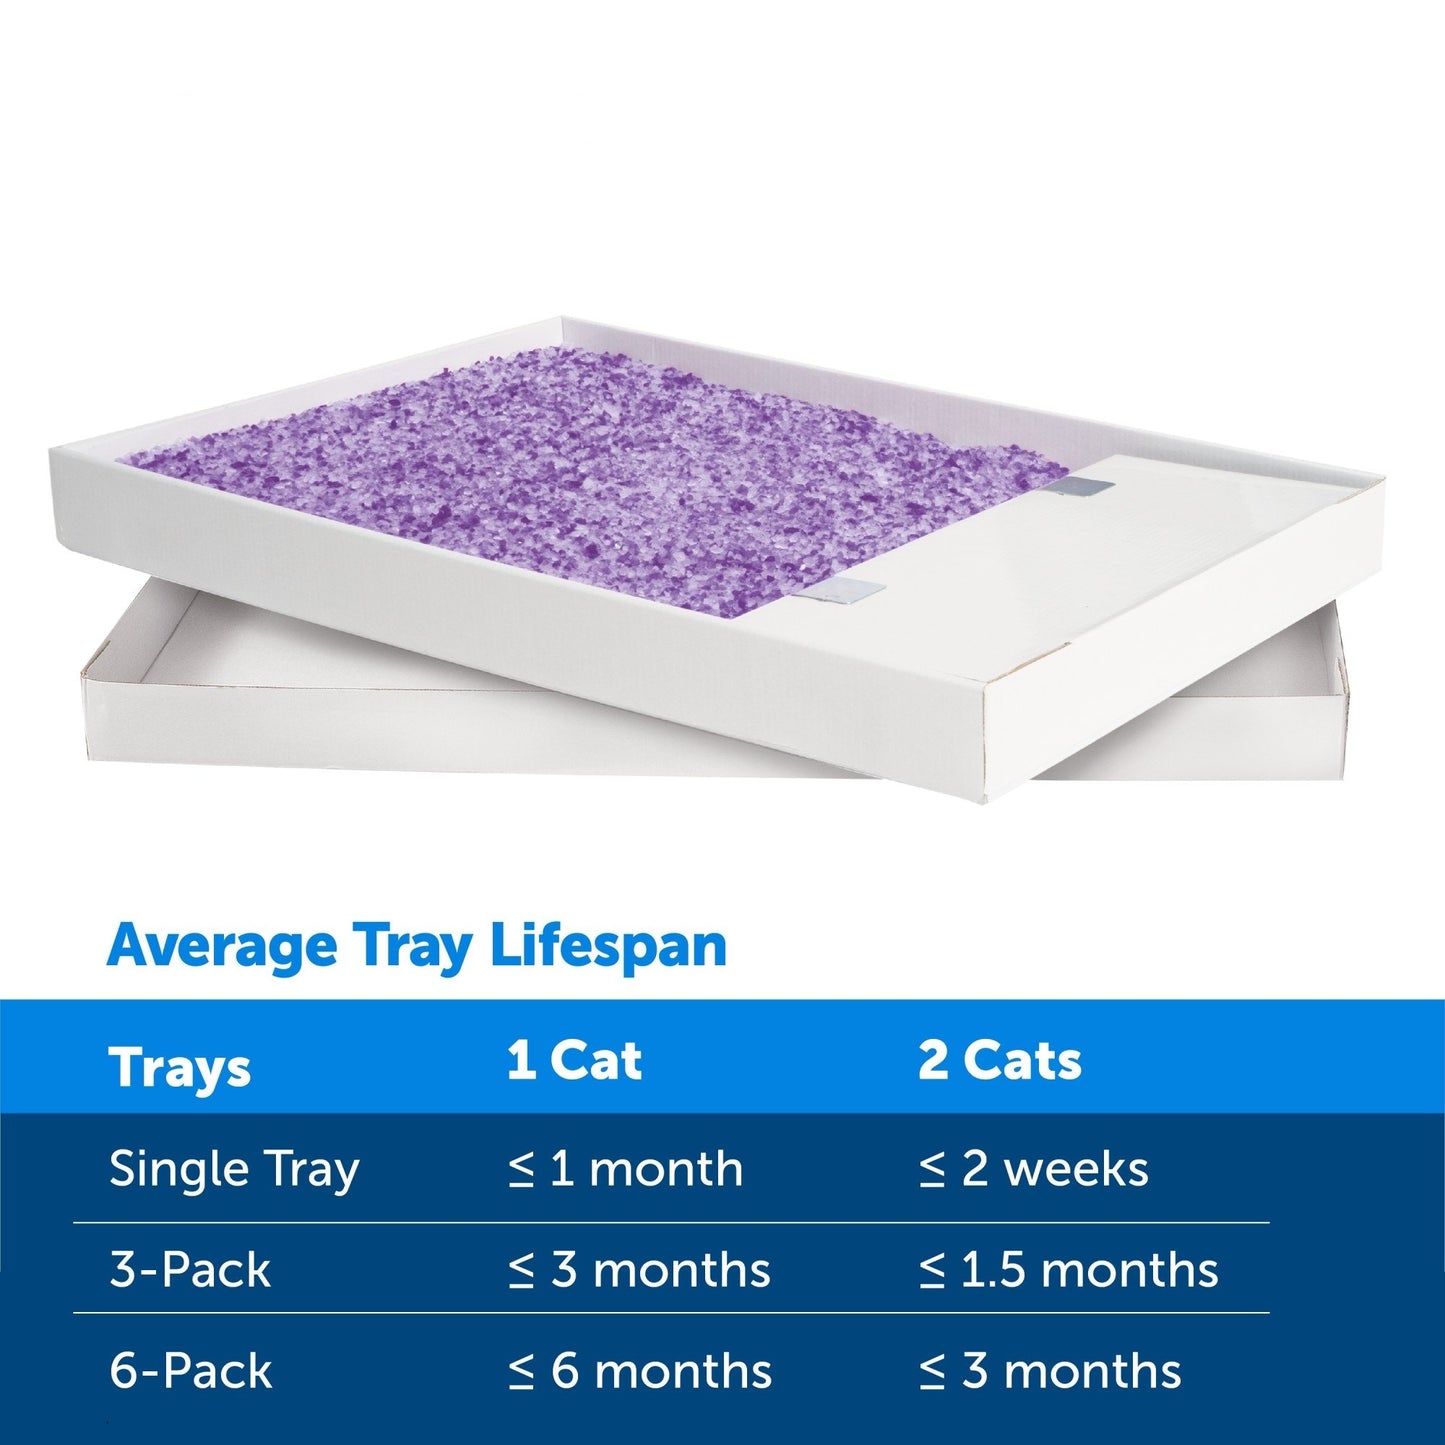 Replacement Lavender Scented Crystal Litter Tray;  3-Pack / 6-Pack Easy Cleanup with Disposable Tray Includes Leak Protection and Low Tracking Litter